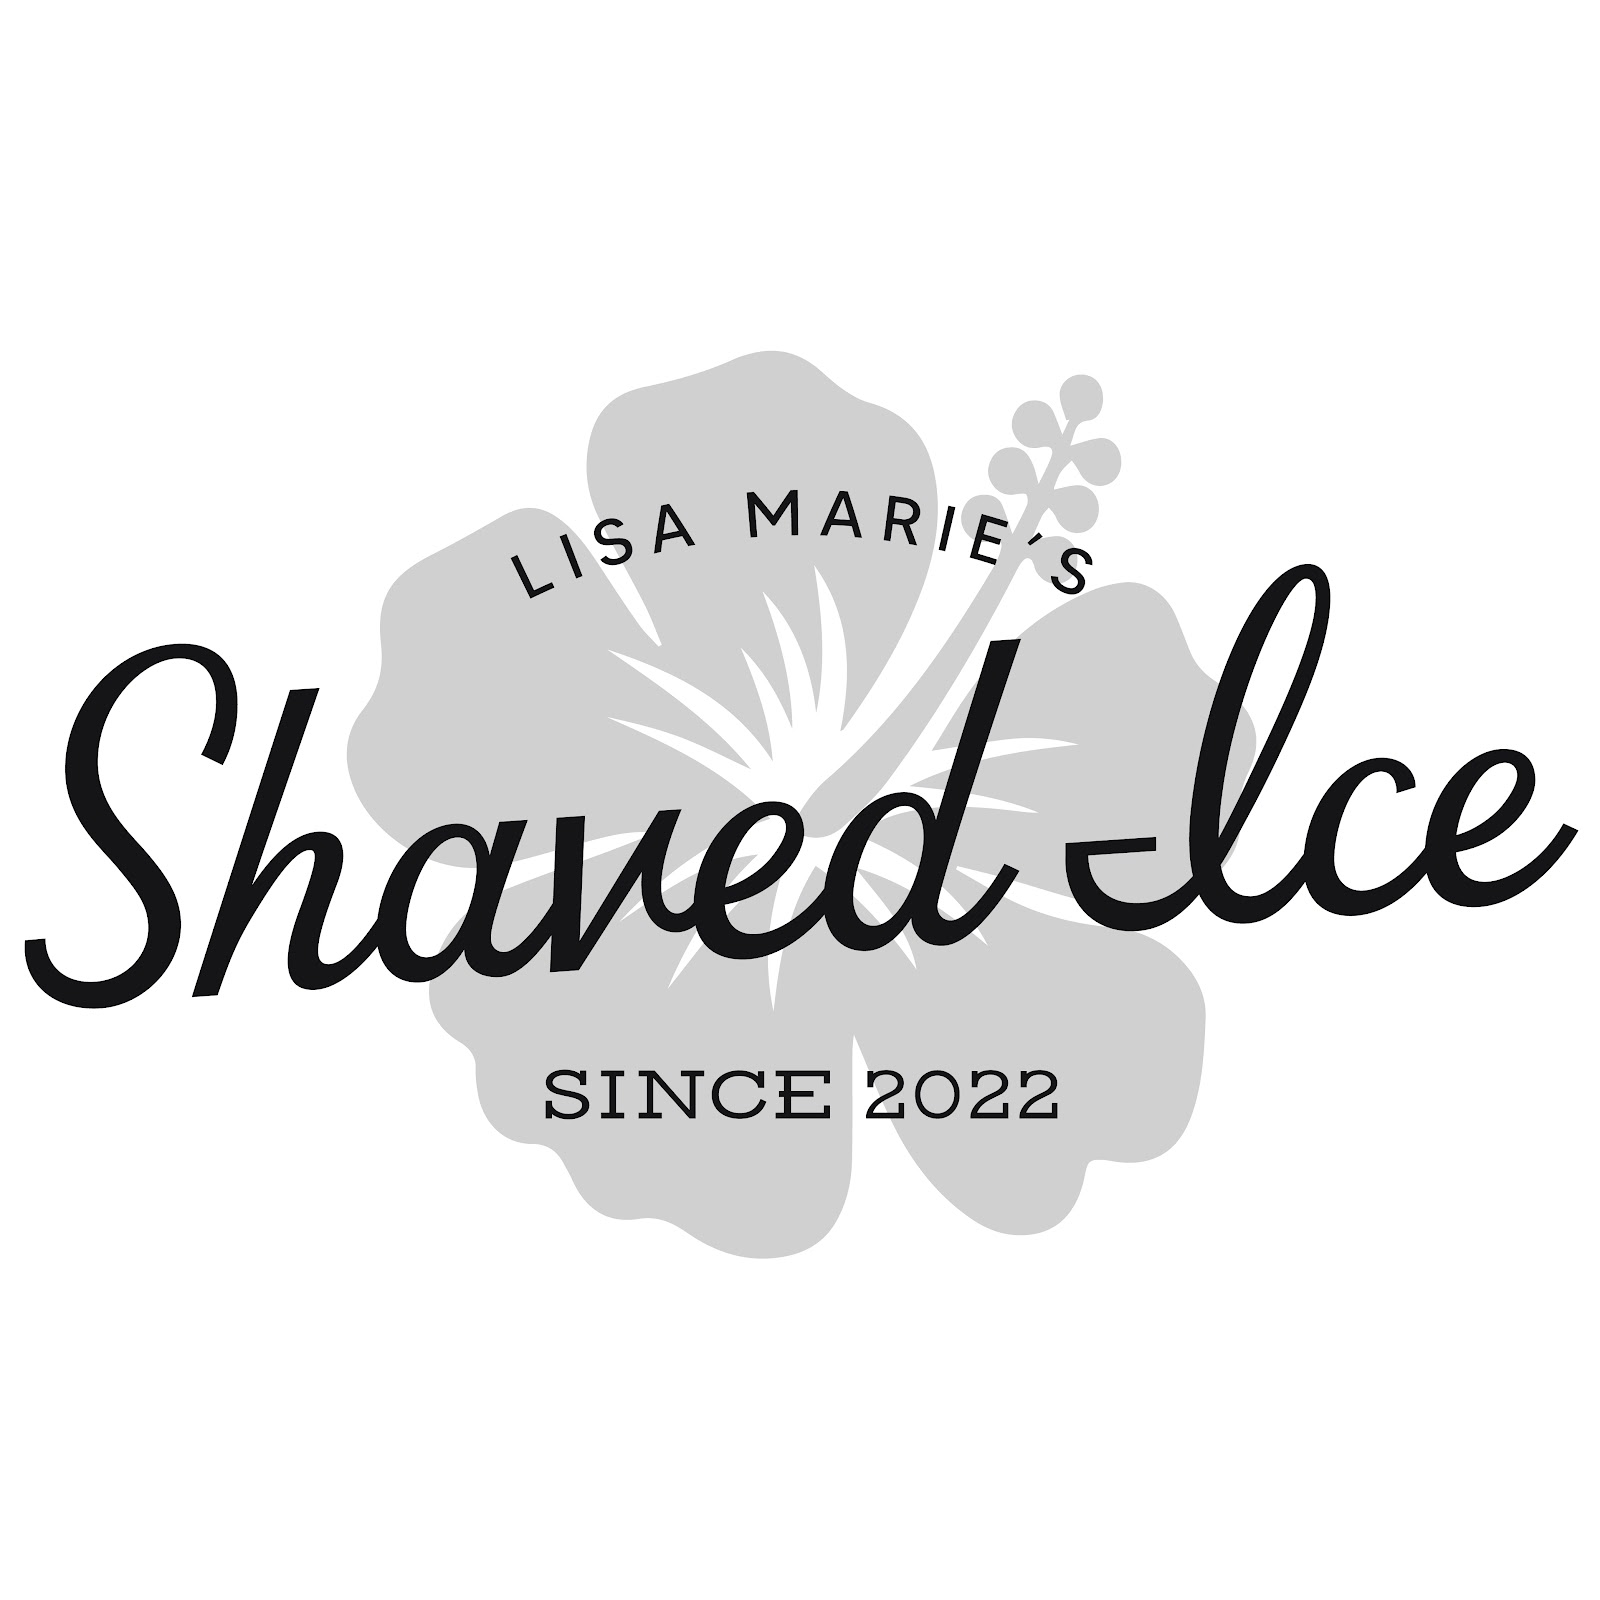 Lisa Marie's Shaved Ice